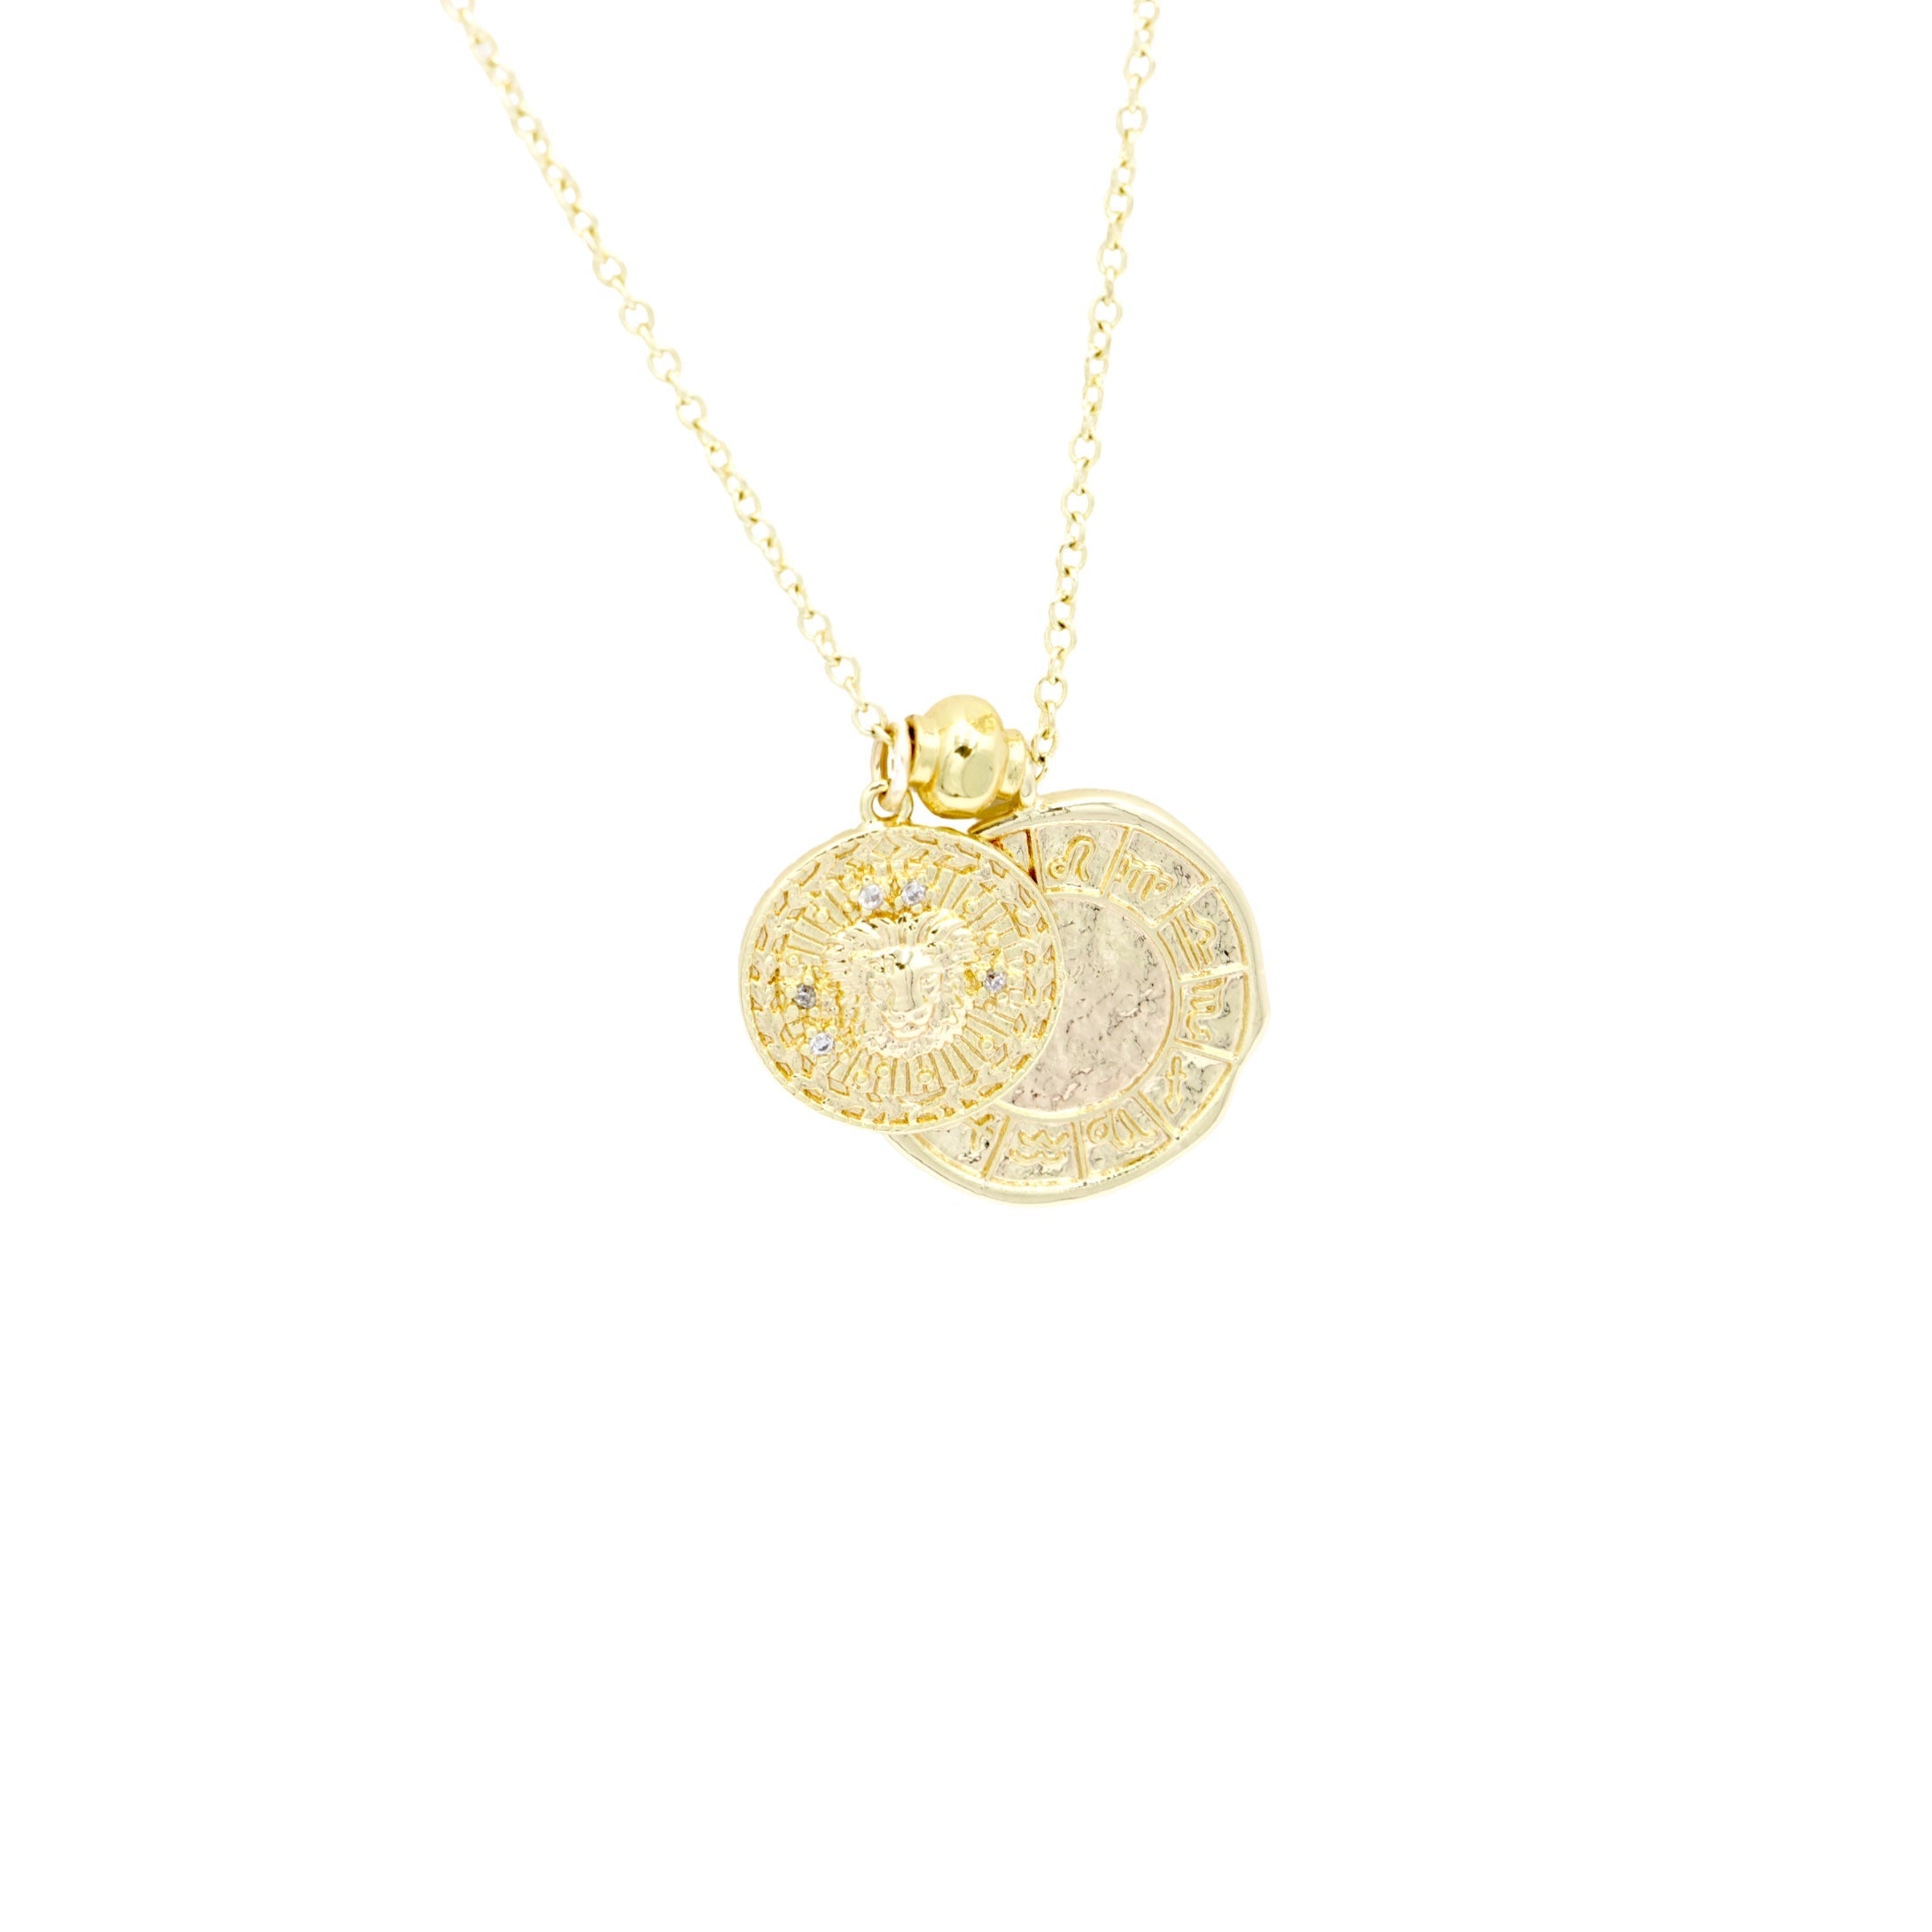 AW Boutique's dual zodiac coin necklace featuring a dainty necklace chain, zodiac rustic coin charm, and your chosen star sign coin charm. Charms separated by a gold bead. Part of the Celestial Collection. Gold filled jewellery. Option shown is Leo.